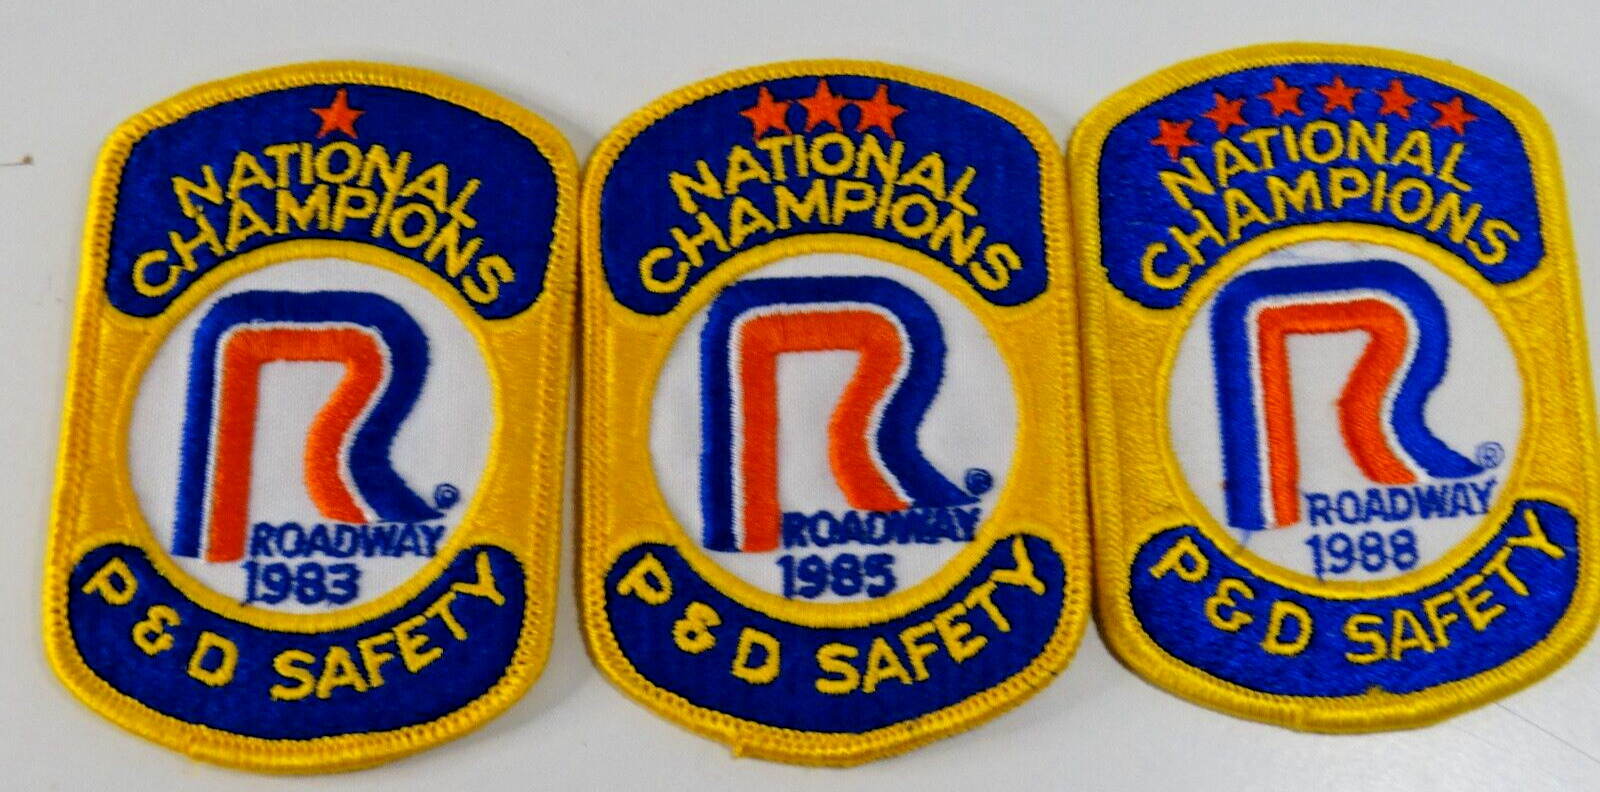 Lot of Roadway P&D Safety National Champions Patches, 1983, 1985, 1988